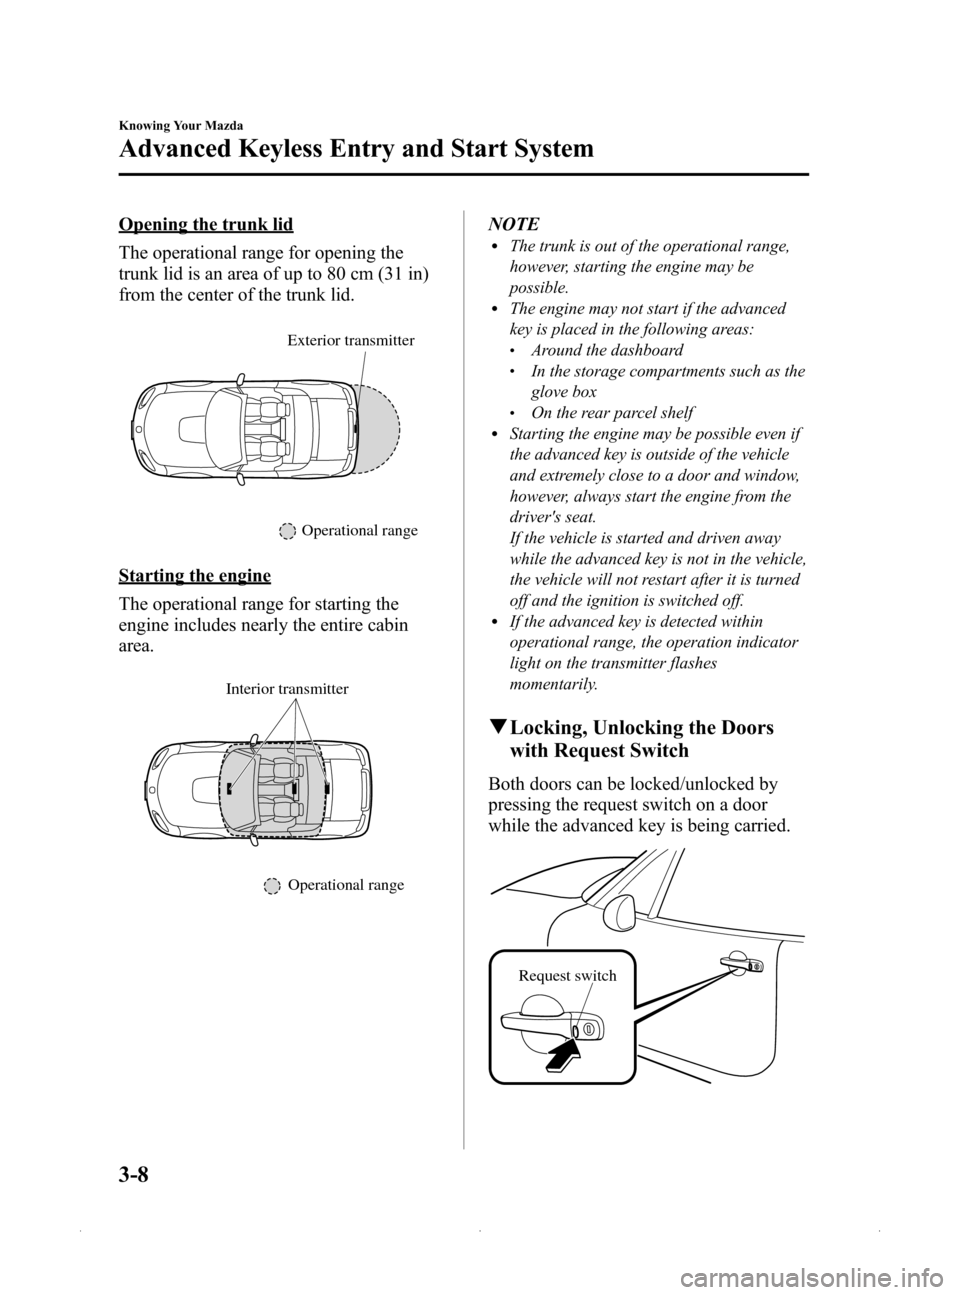 MAZDA MODEL MX-5 PRHT 2015  Owners Manual (in English) Black plate (62,1)
Opening the trunk lid
The operational range for opening the
trunk lid is an area of up to 80 cm (31 in)
from the center of the trunk lid.
Exterior transmitter
Operational range
Star